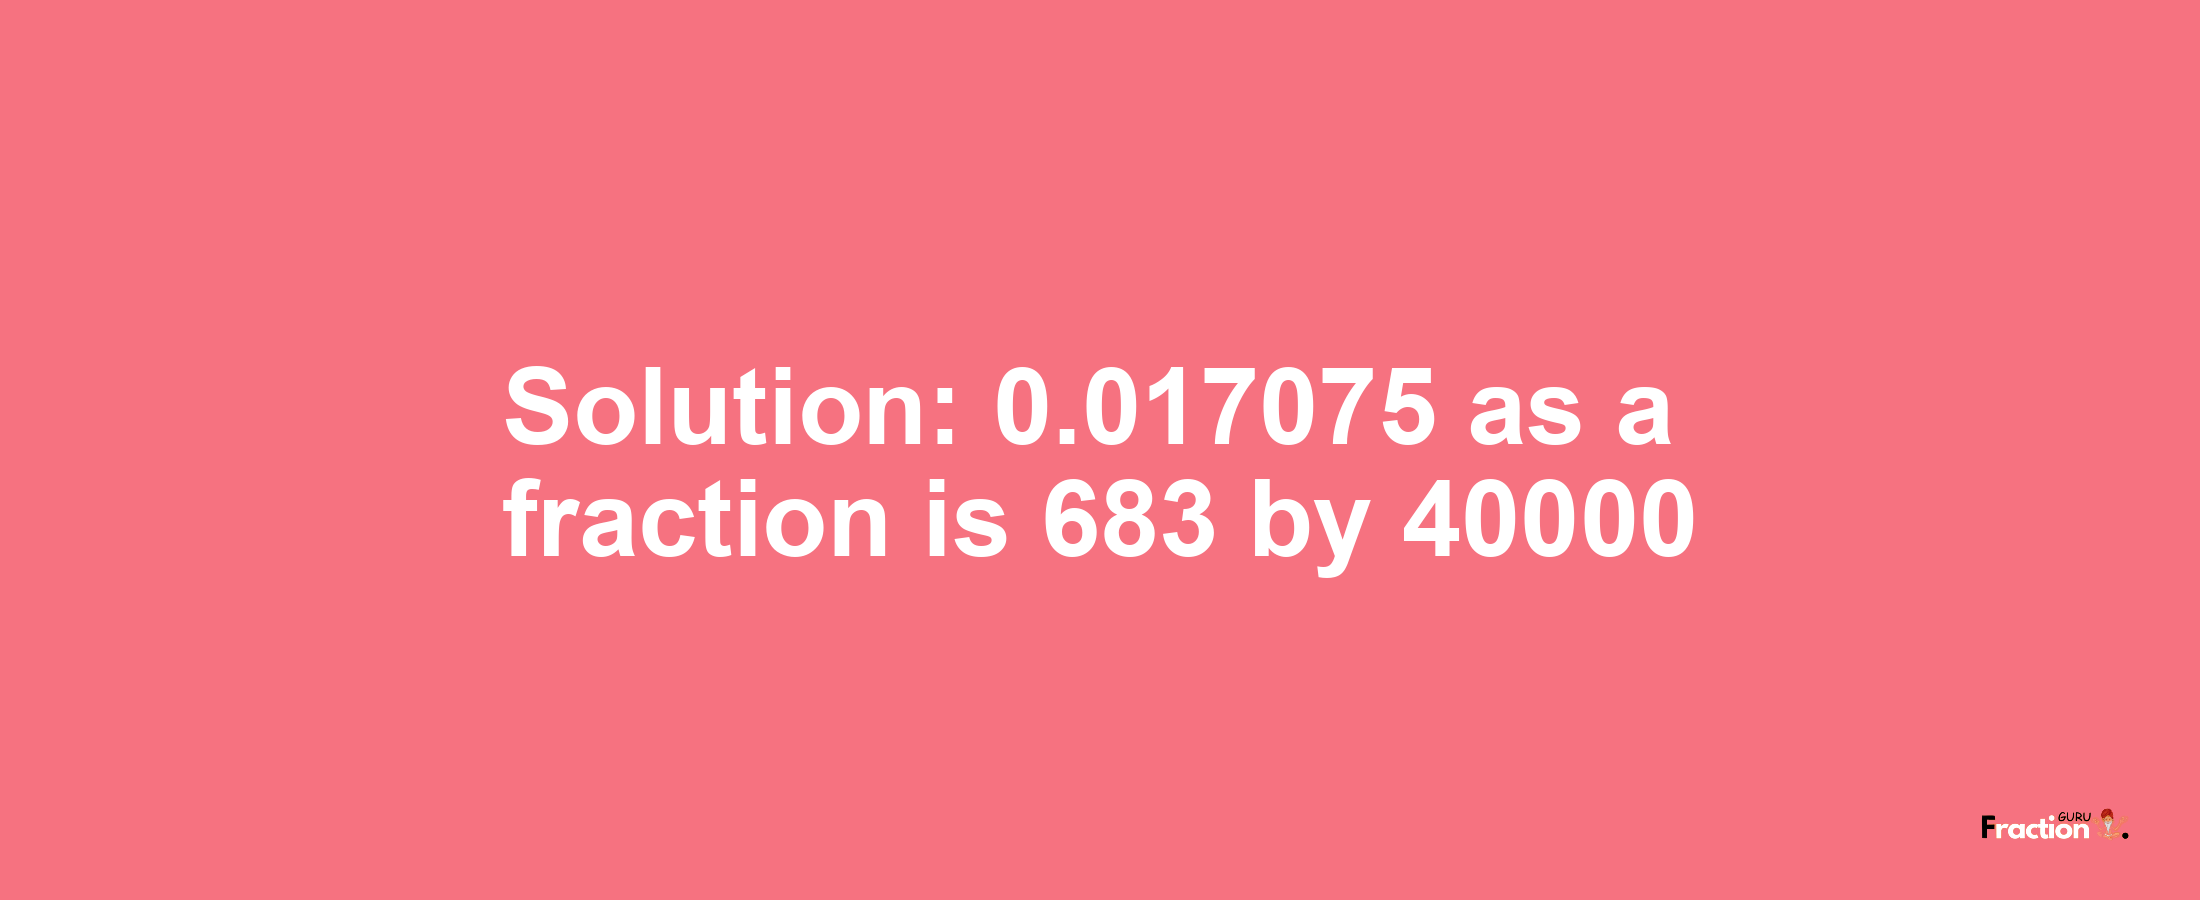 Solution:0.017075 as a fraction is 683/40000